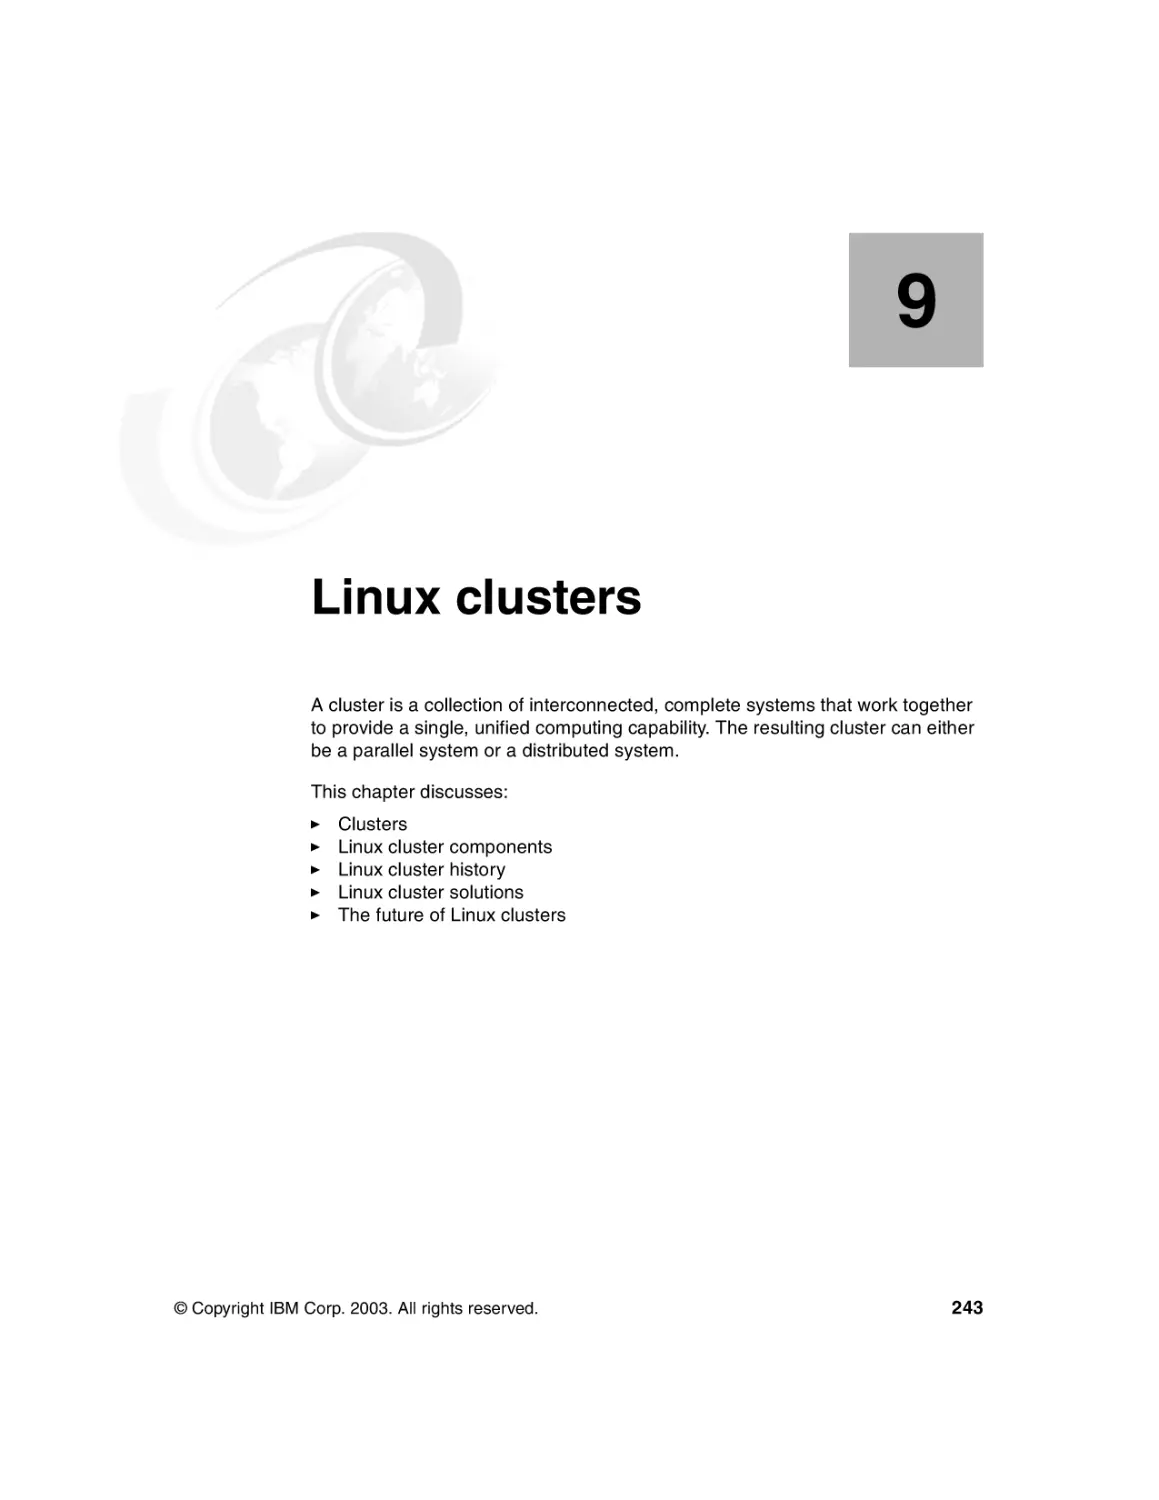 Chapter 9. Linux clusters